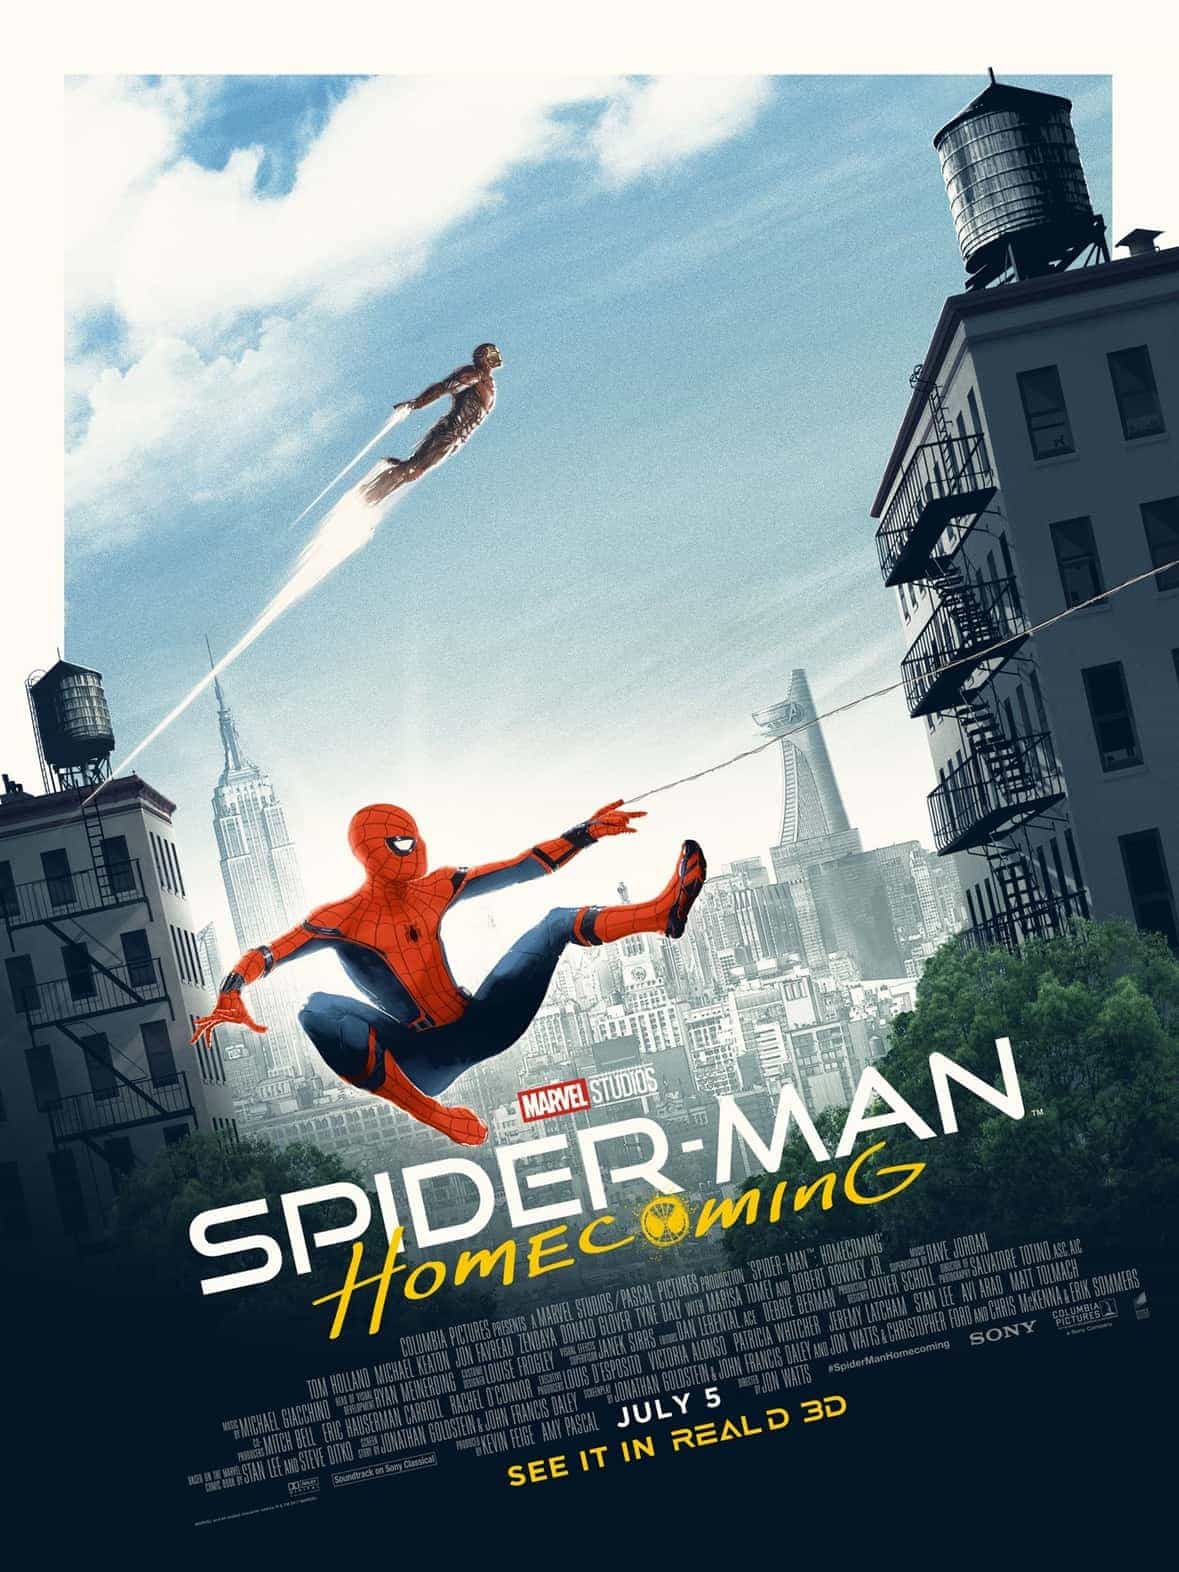 Spider-Man: Homecoming gets a 12A age rating in the UK for moderate fantasy violence, threat, sex references, obscured strong language